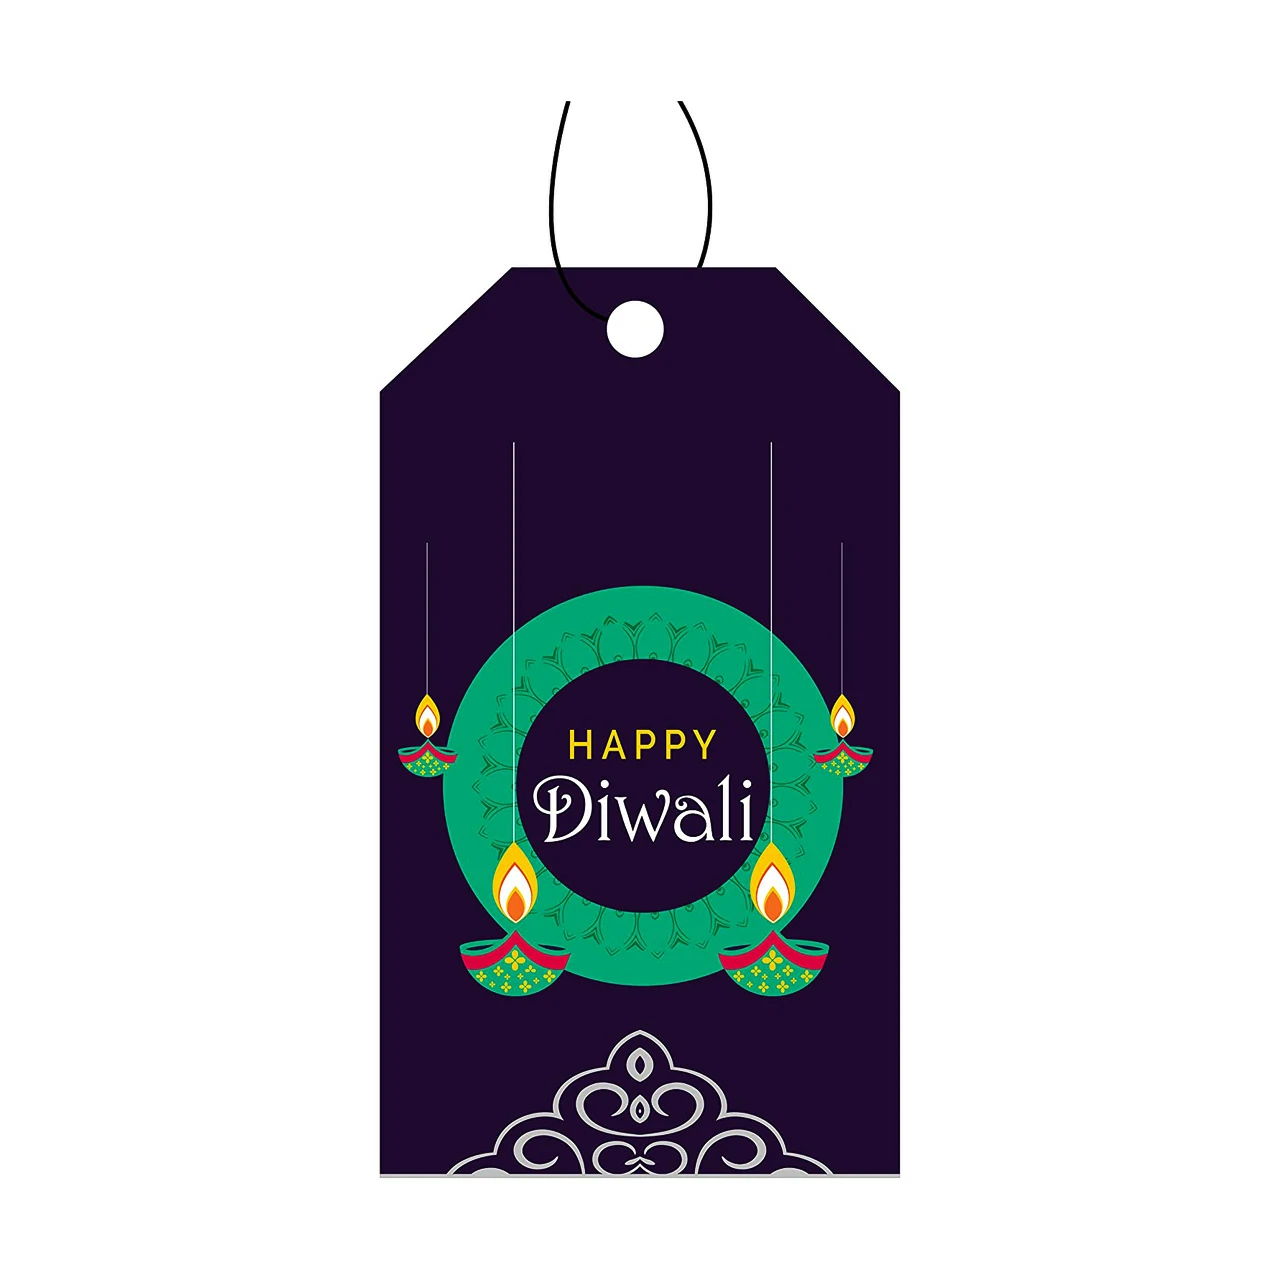 Diwali multicolored gift tags for gift packaging Diwali Gifts Diwali Gift Tags Diwali Gifts for Friends Diwali Gifts for Friends and Family Gifts for Diwali